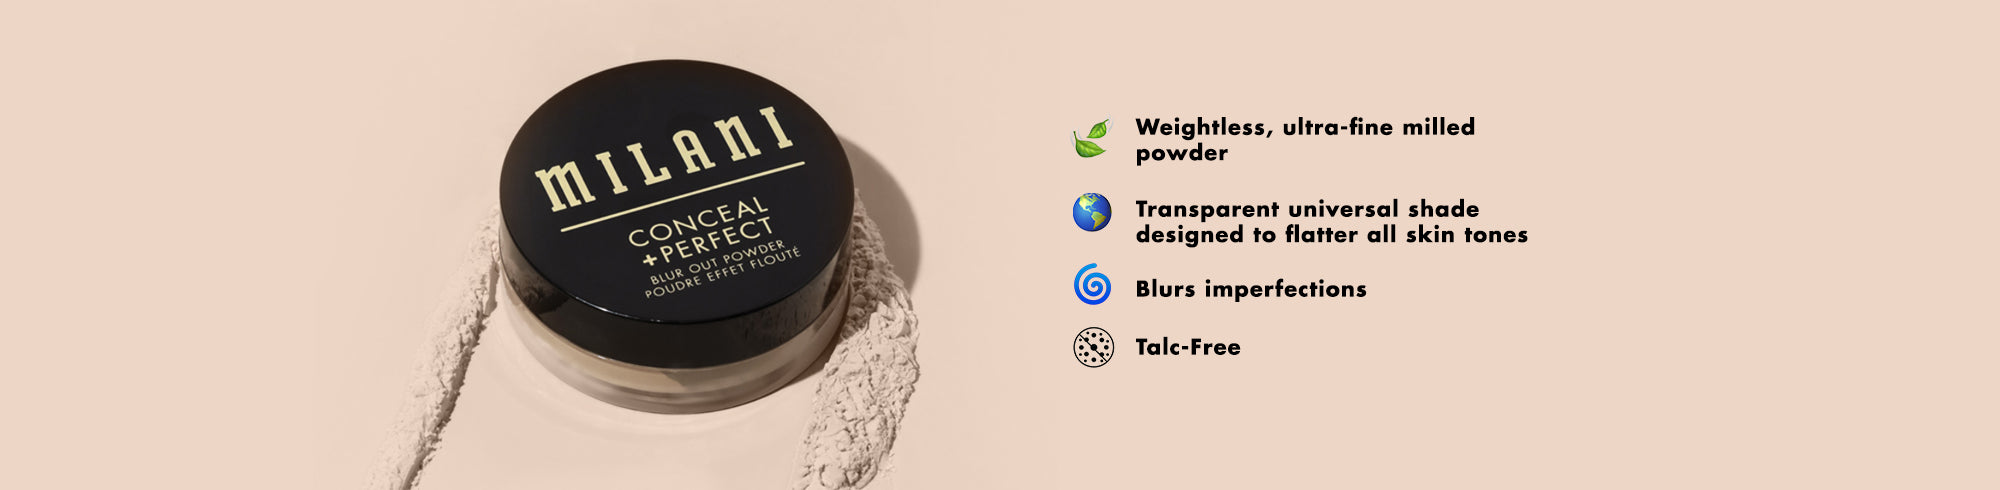 New Conceal + Perfect Blur out powder claims 